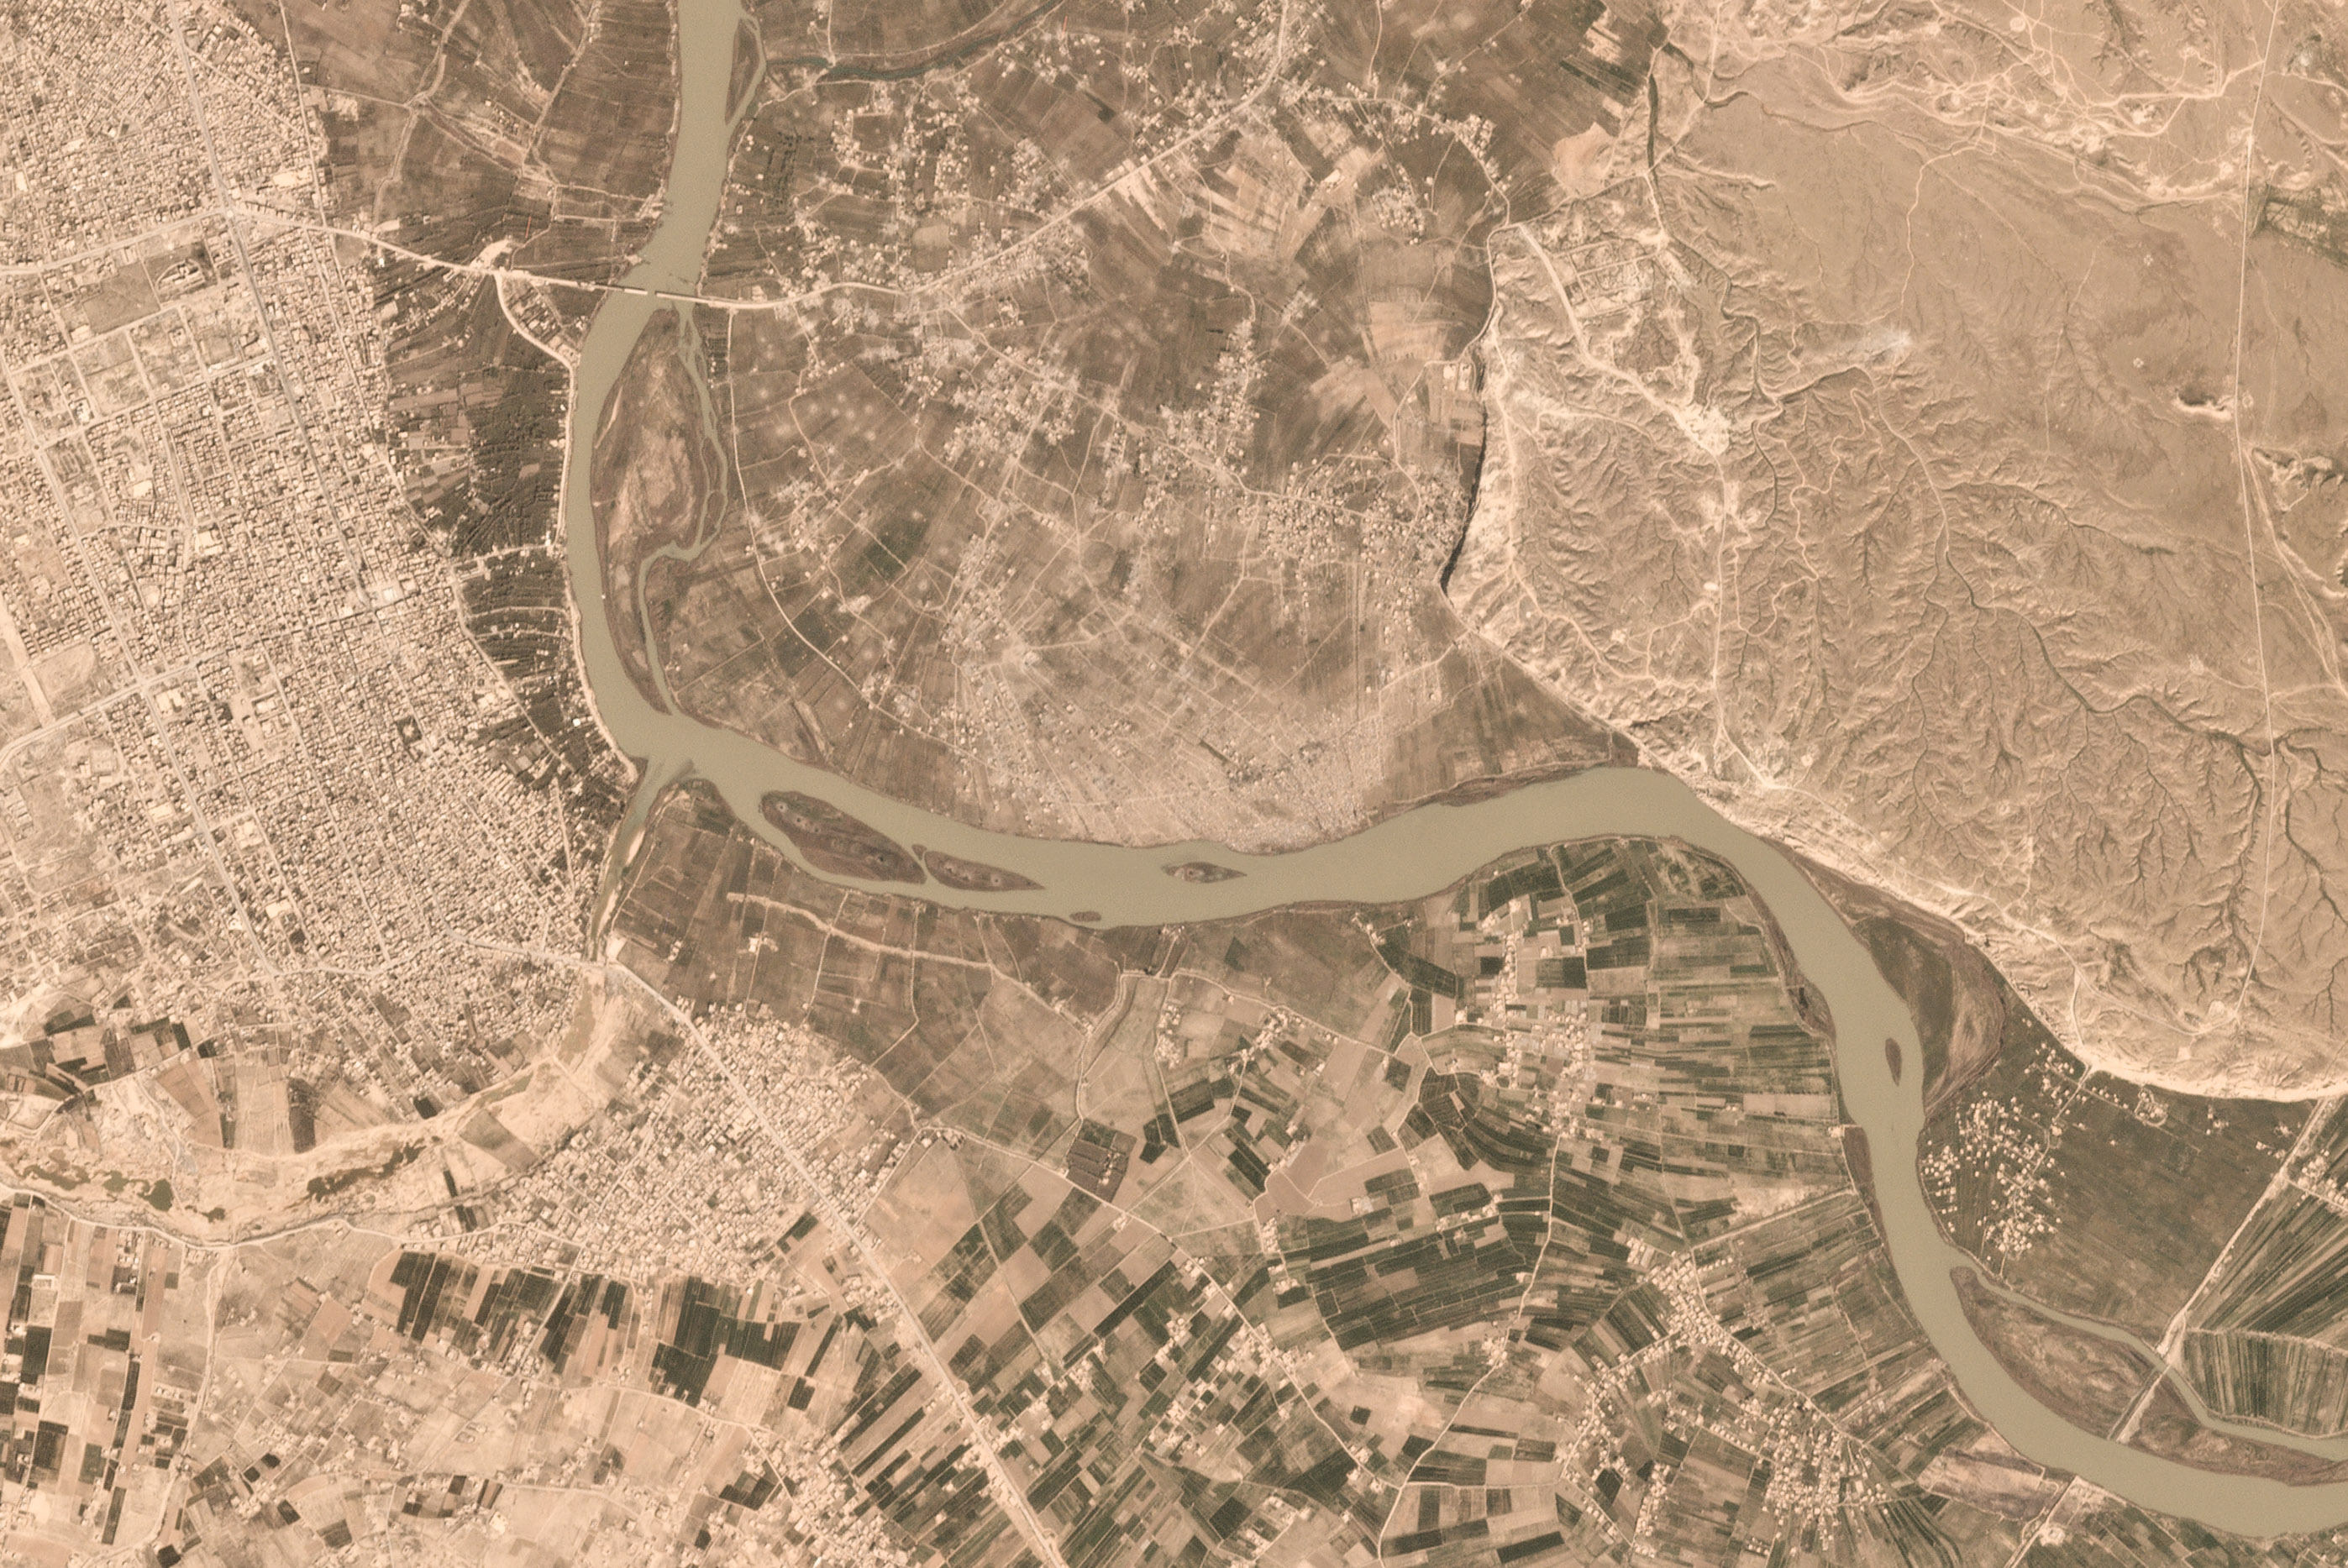 Planet Lab imagery of Baghouz, Syria on March 6 2019